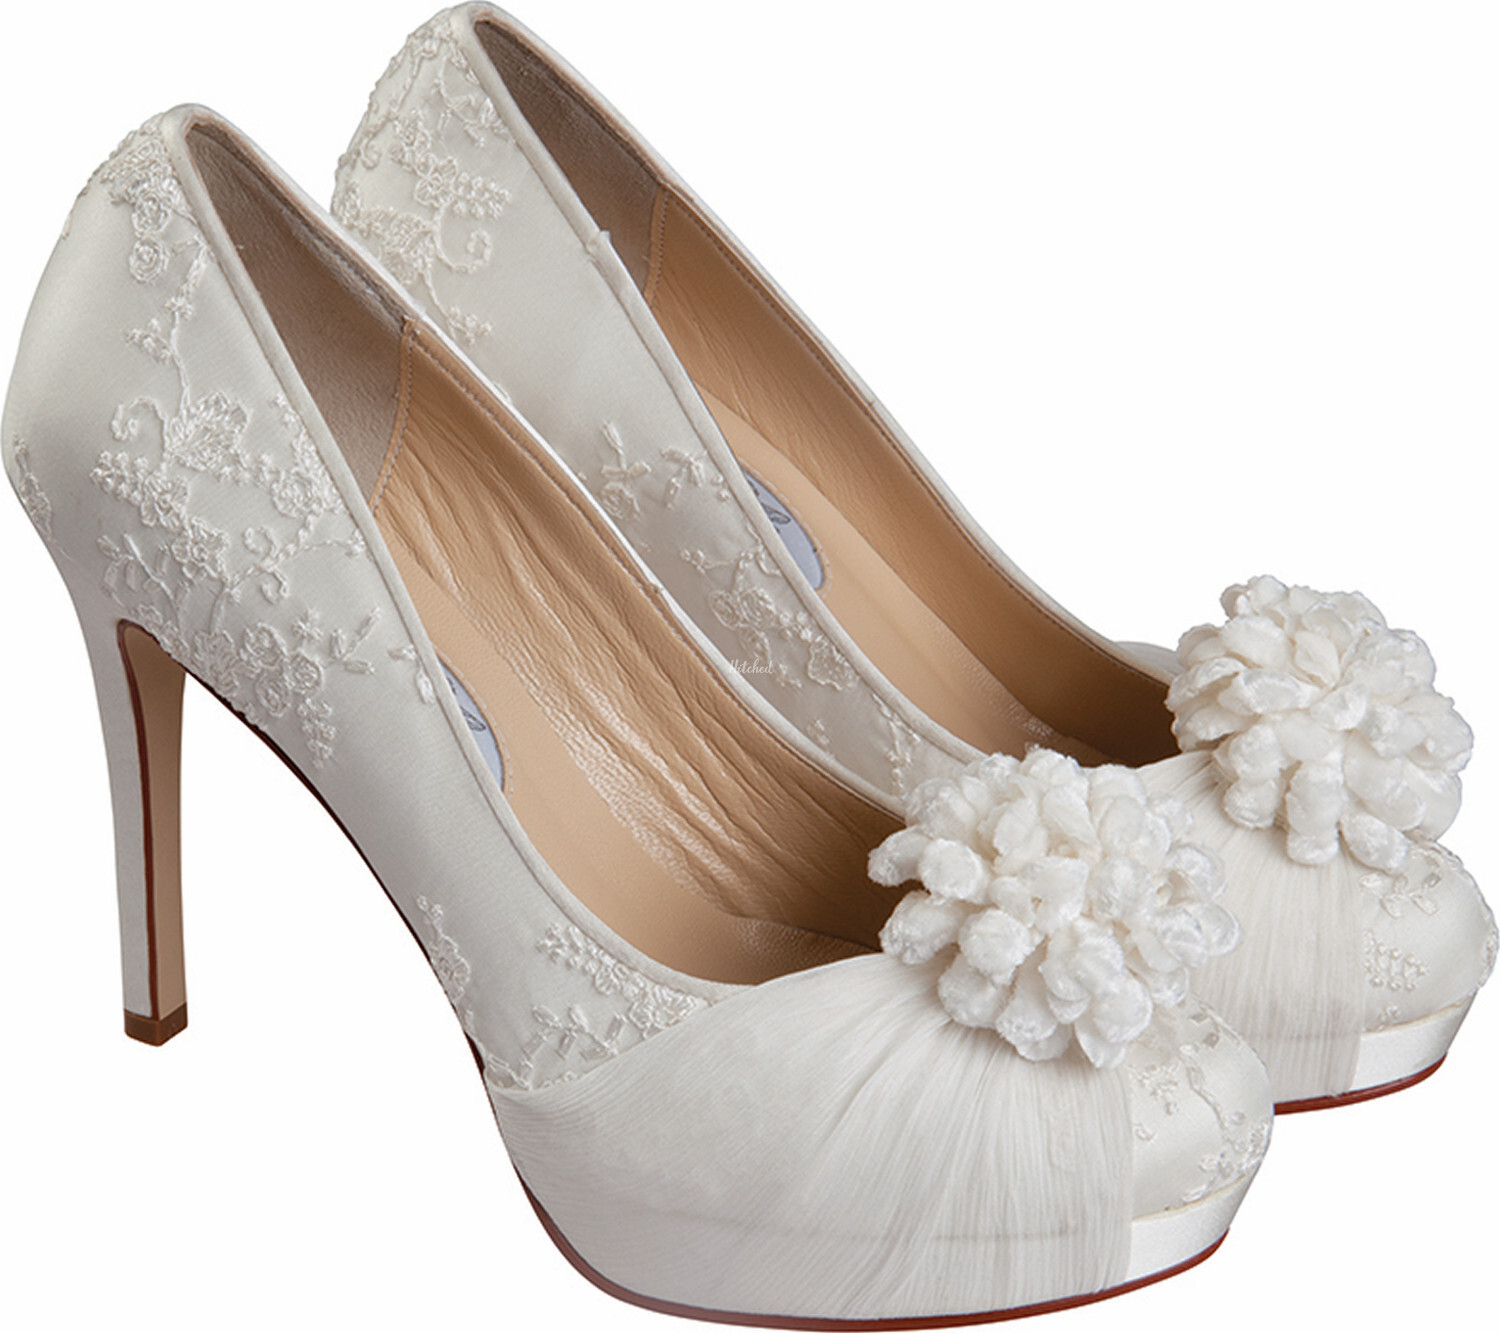 Bon Bon Wedding Shoes from Hassall - hitched.co.uk